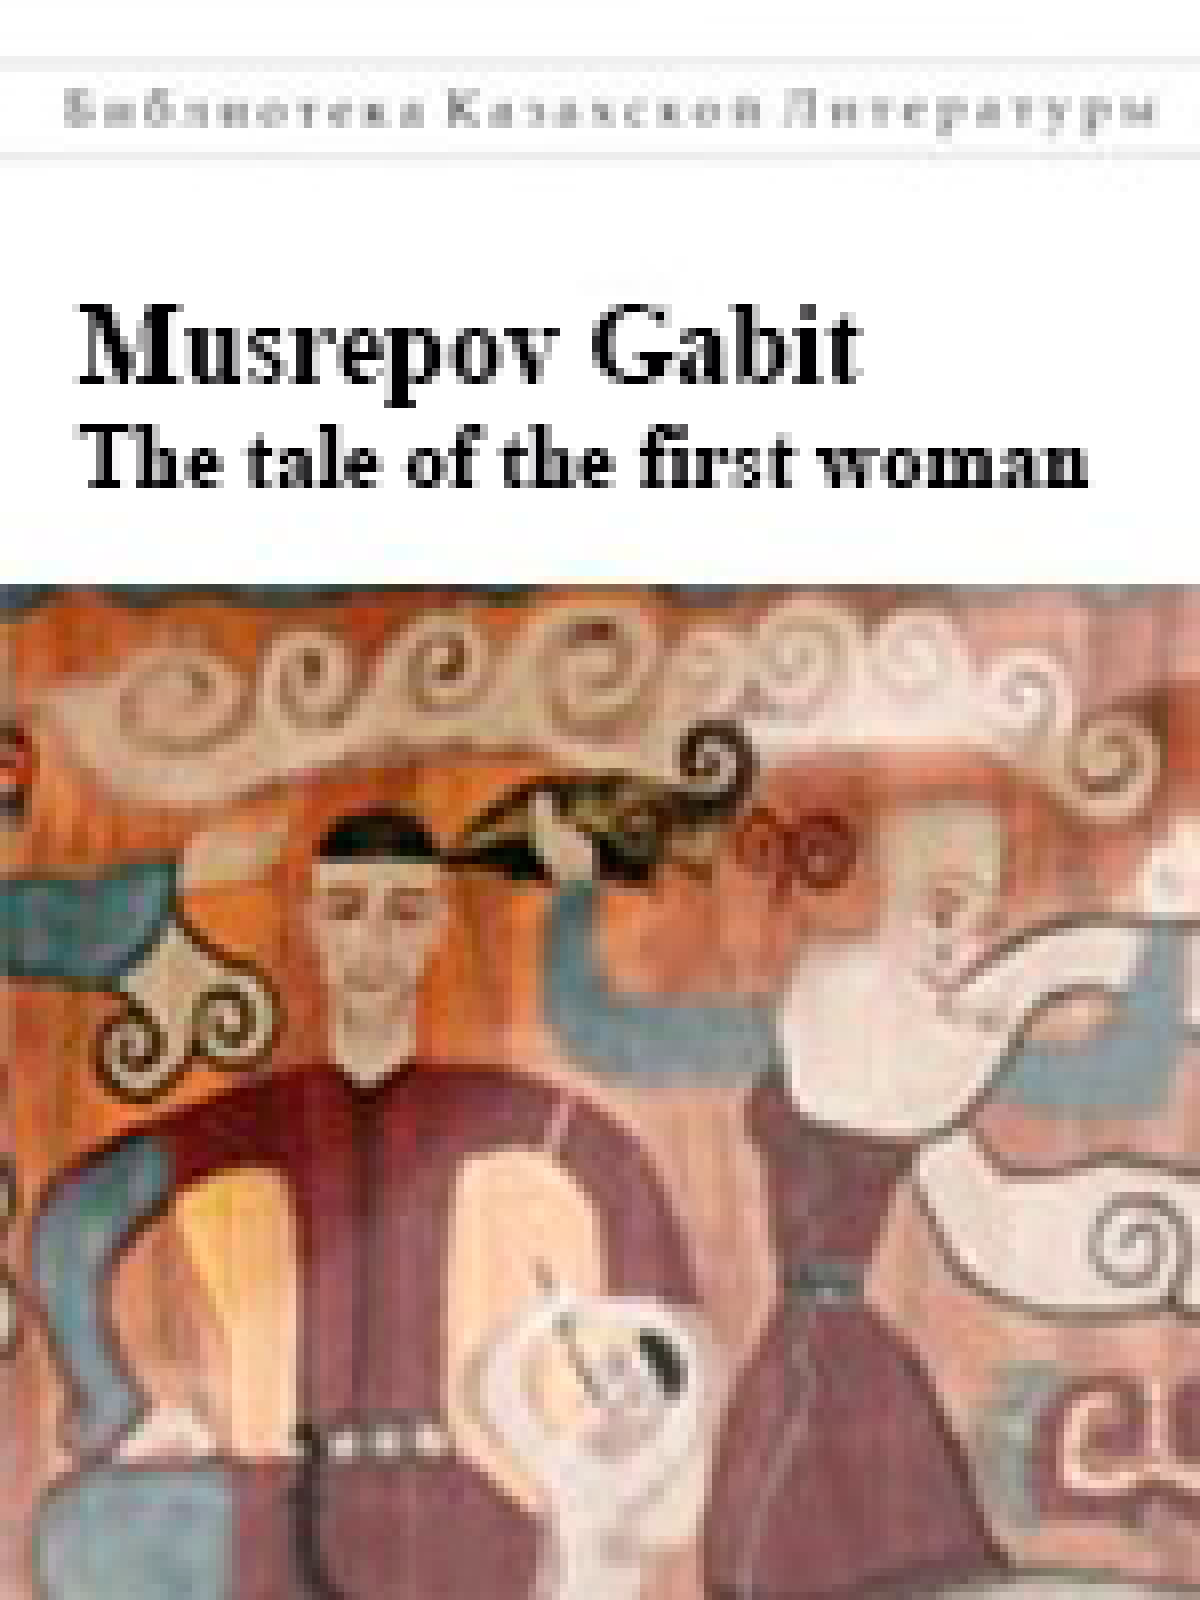 The tale of the first woman